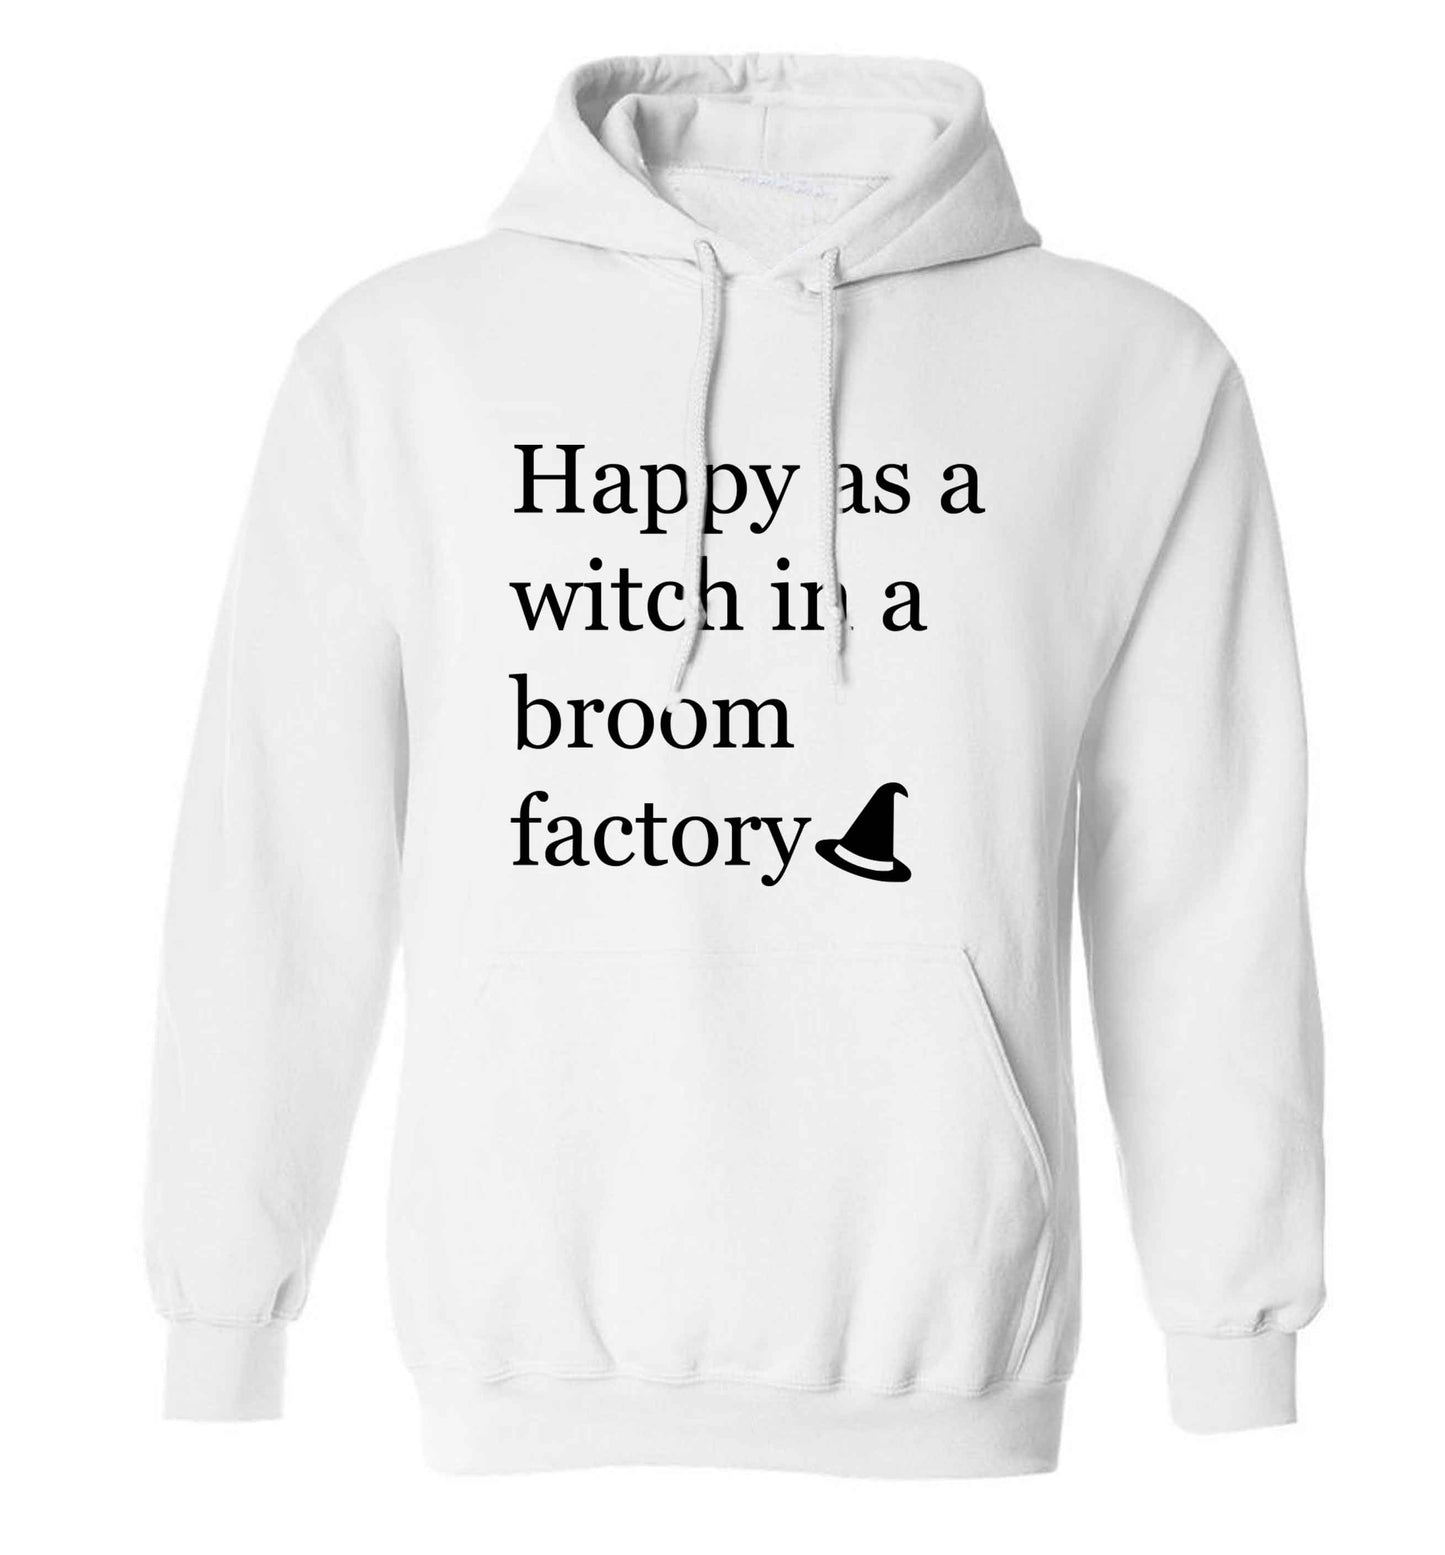 Happy as a witch in a broom factory adults unisex white hoodie 2XL